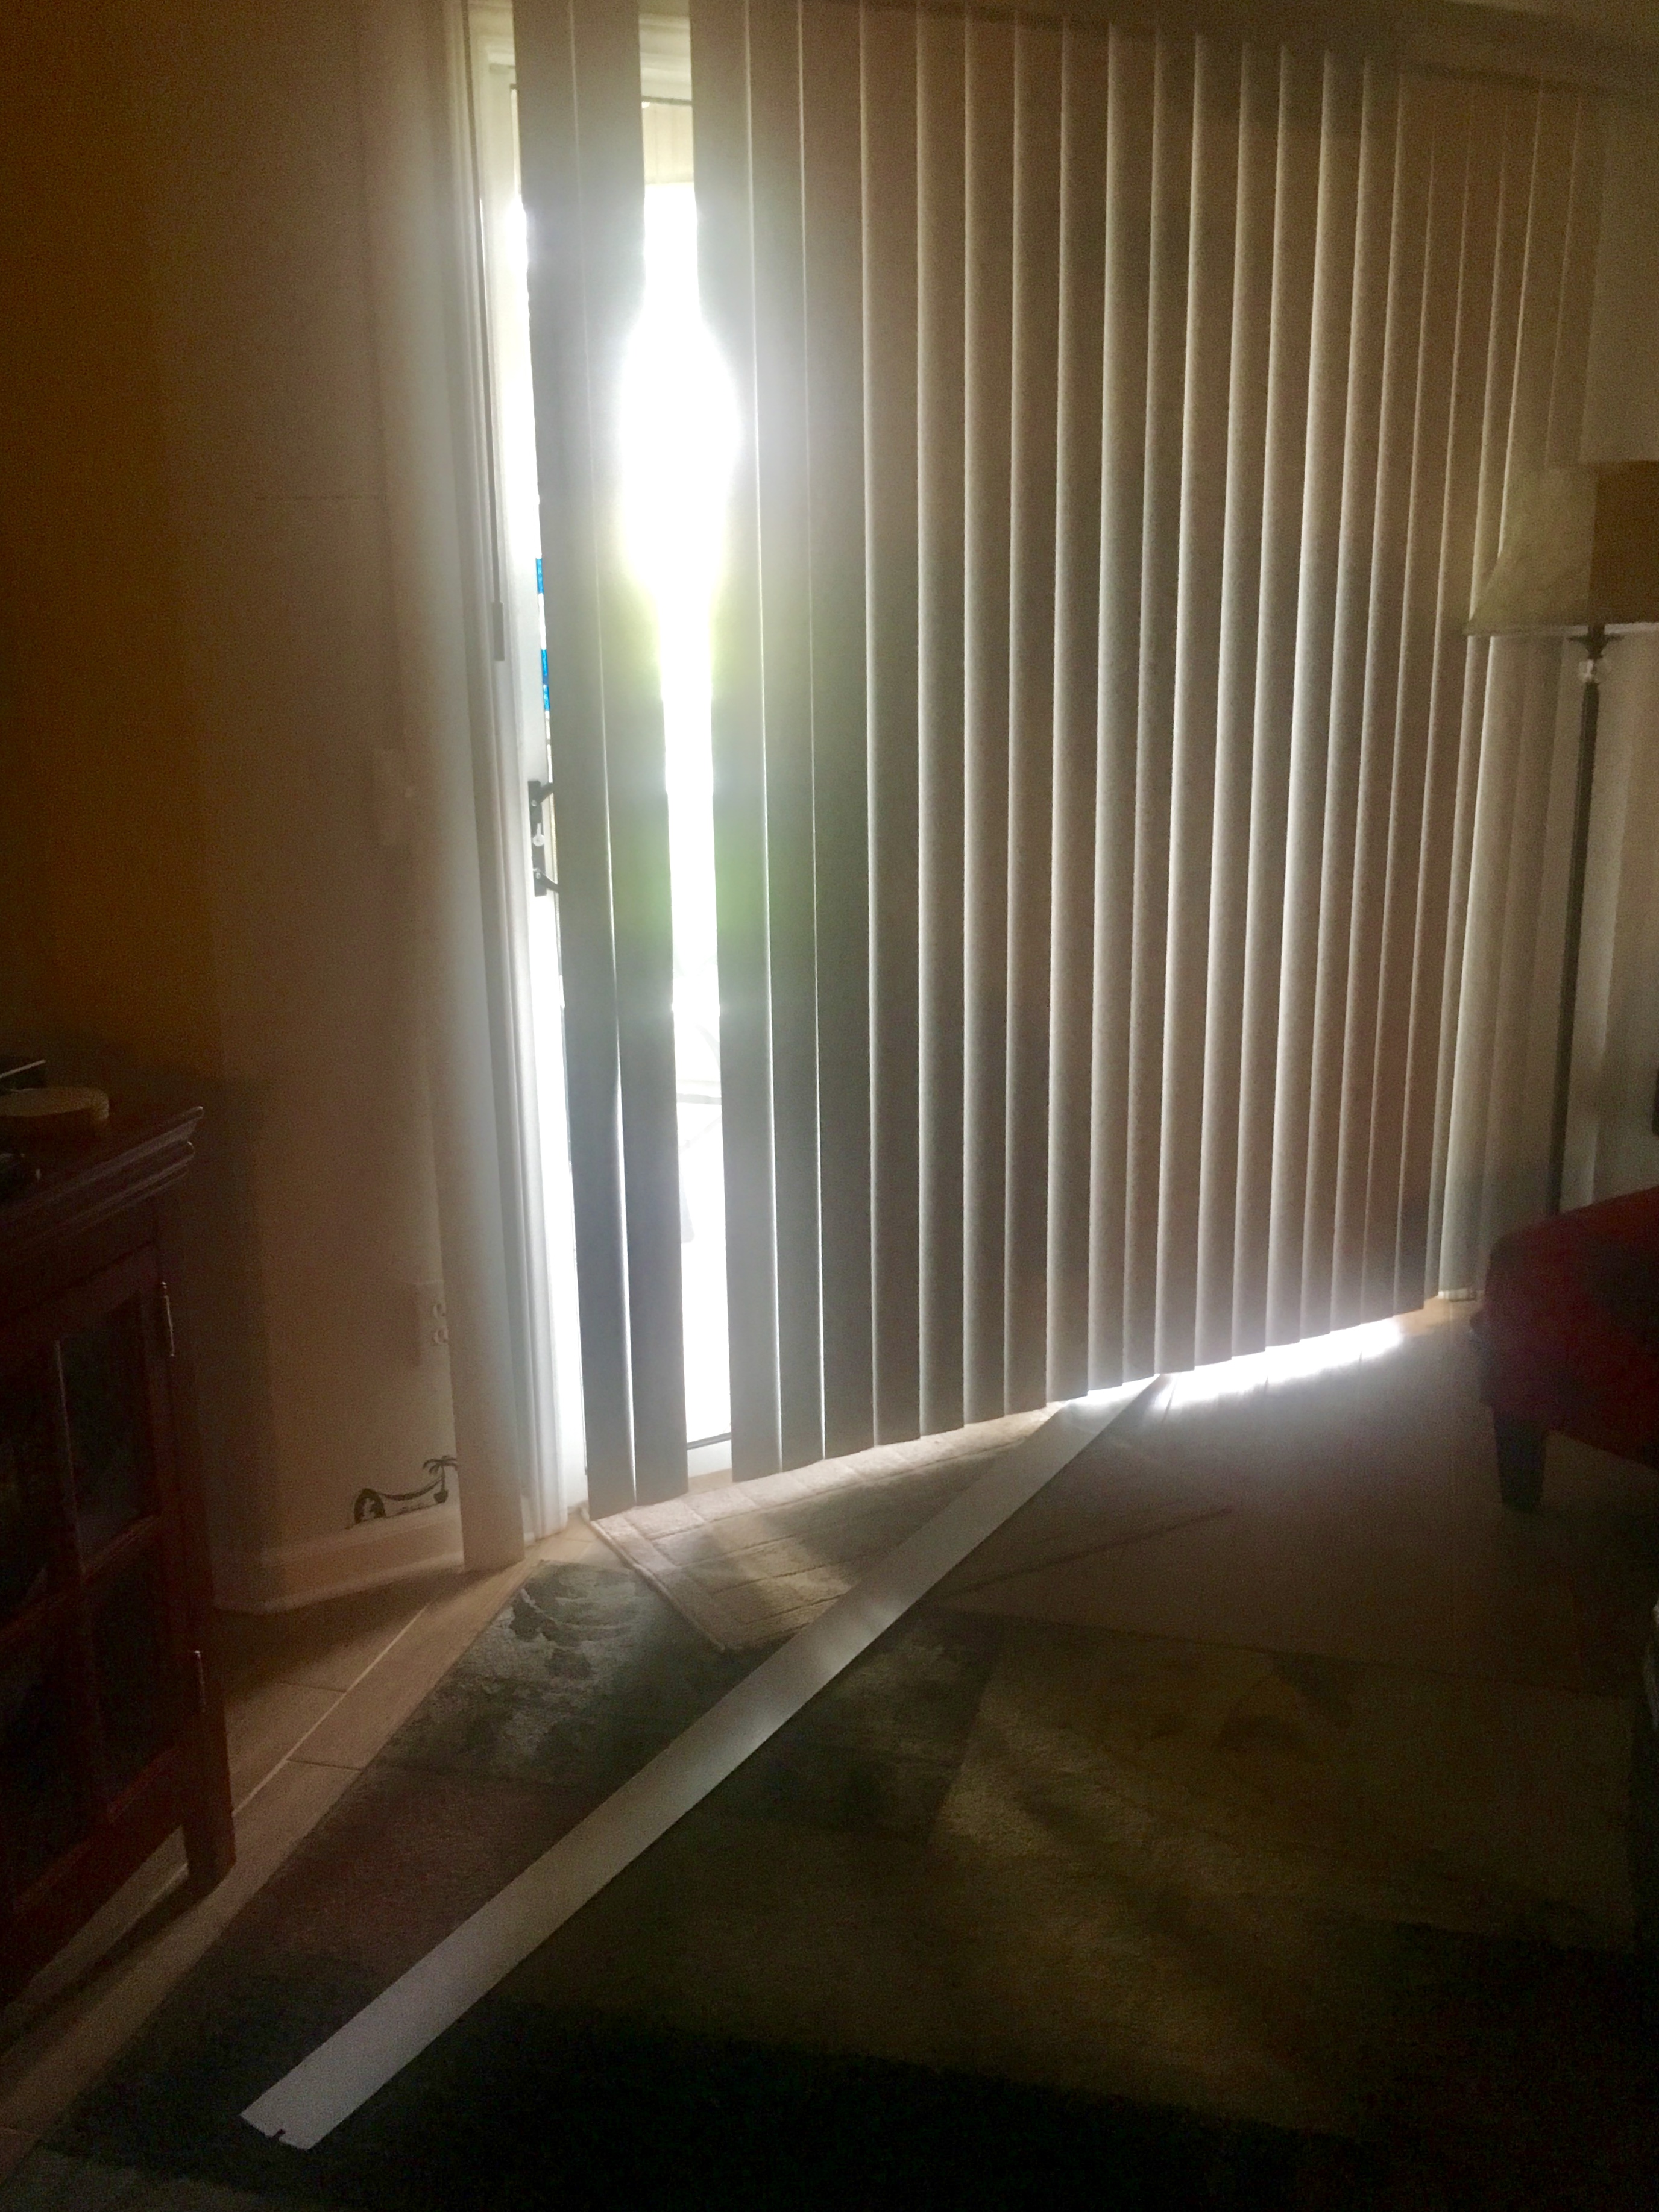 Vertical Blinds Or Curtains On Sliding, Patio Door Curtains Vs Blinds